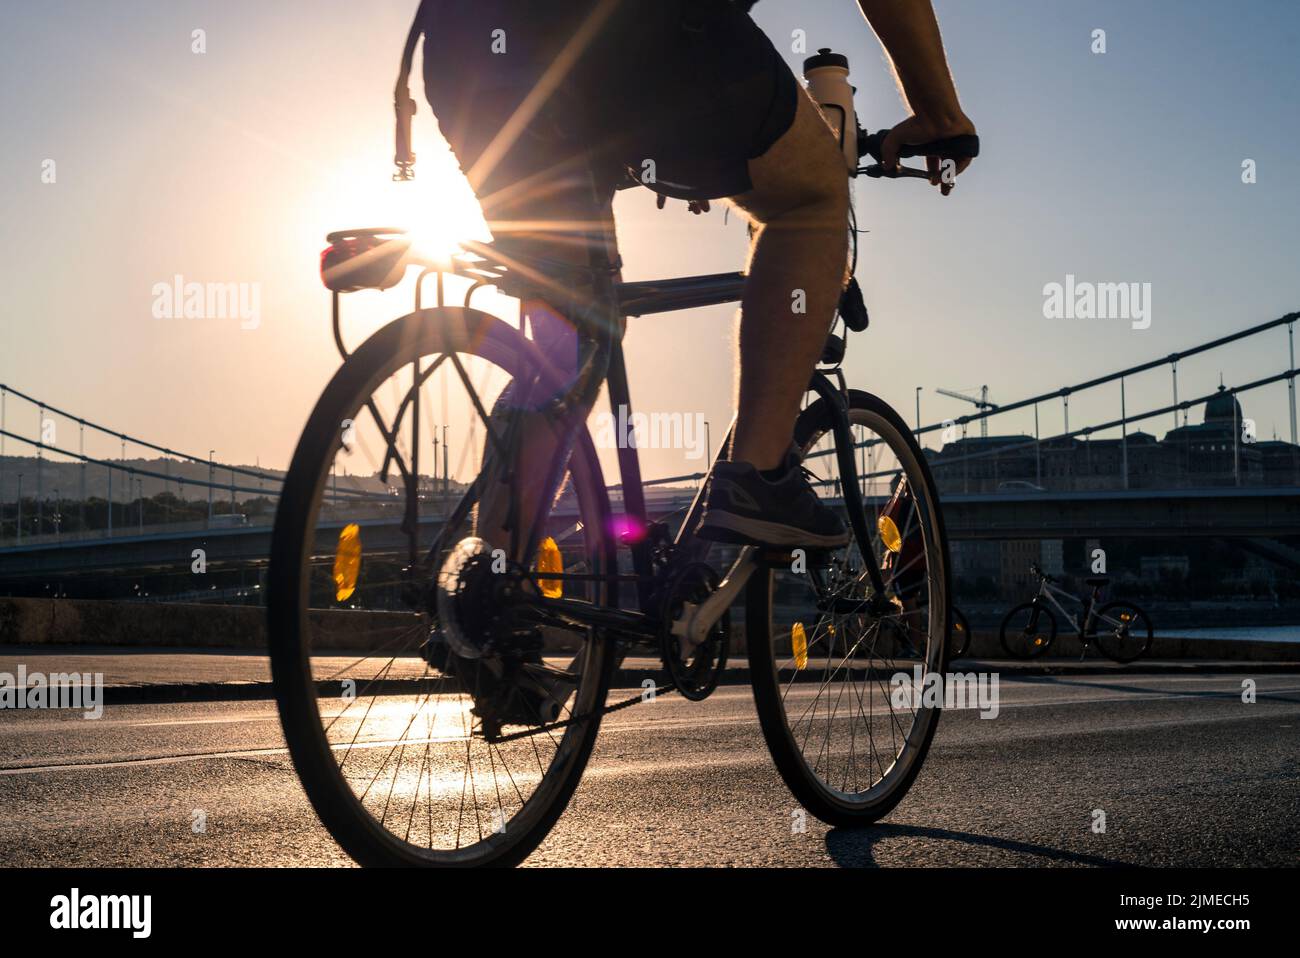 Bicyclist in a city ride Stock Photo